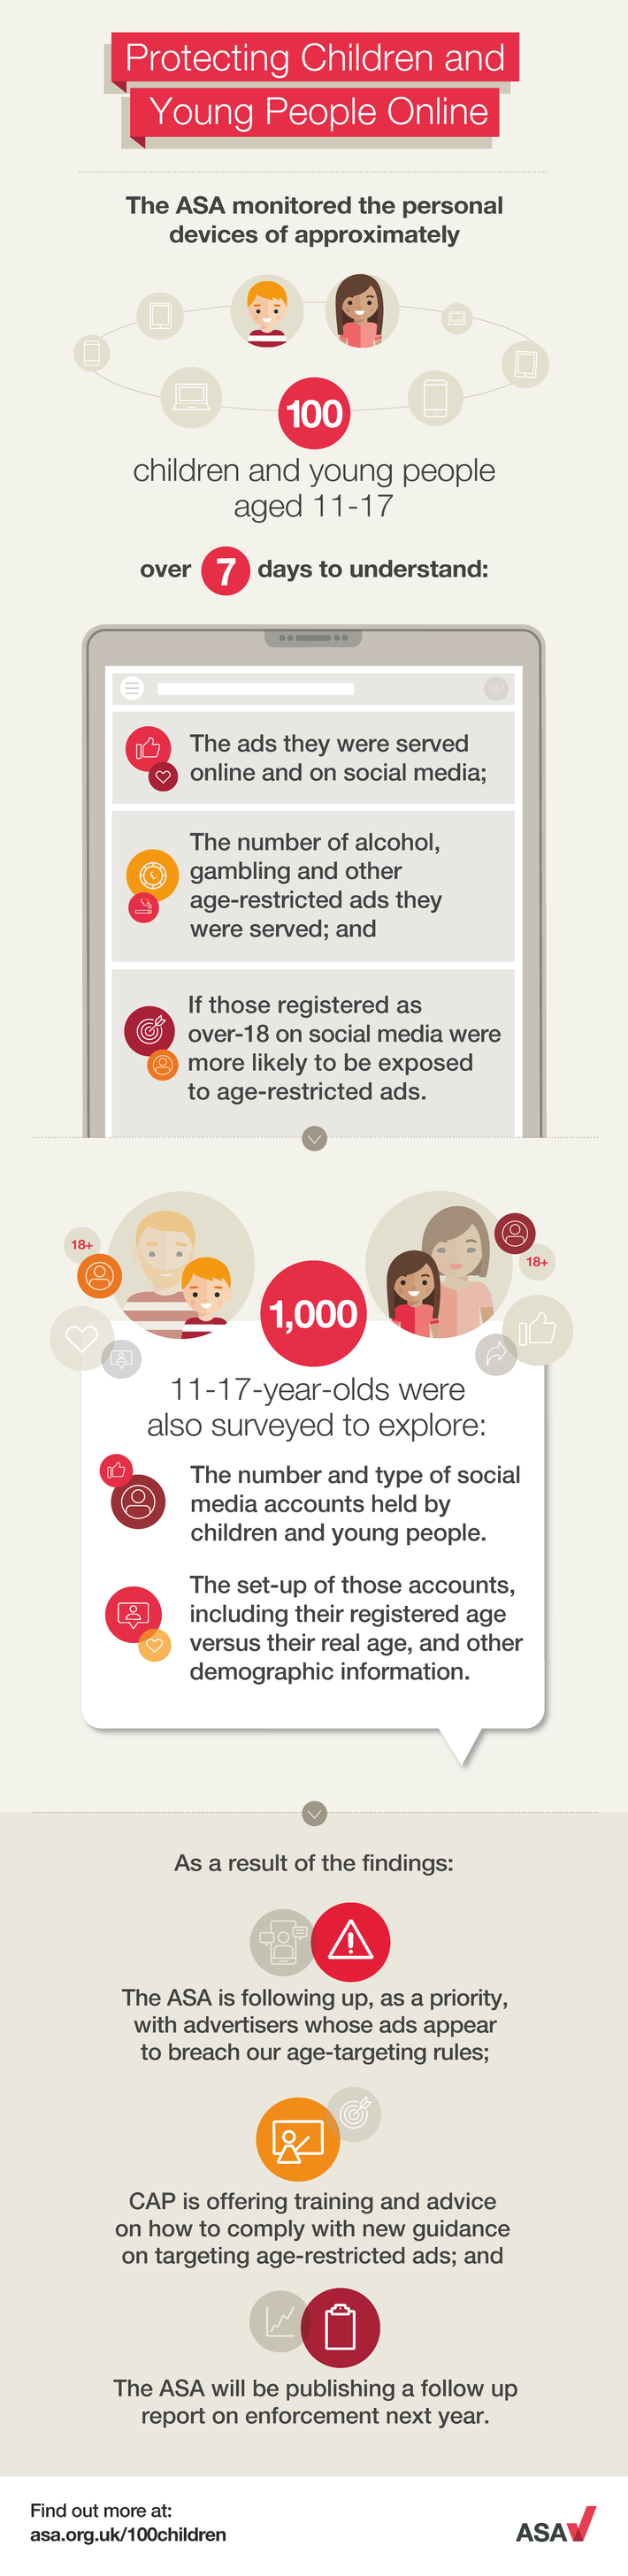 An infographic giving an overview of how the ASA carried out their 100 Children Report monitoring work.